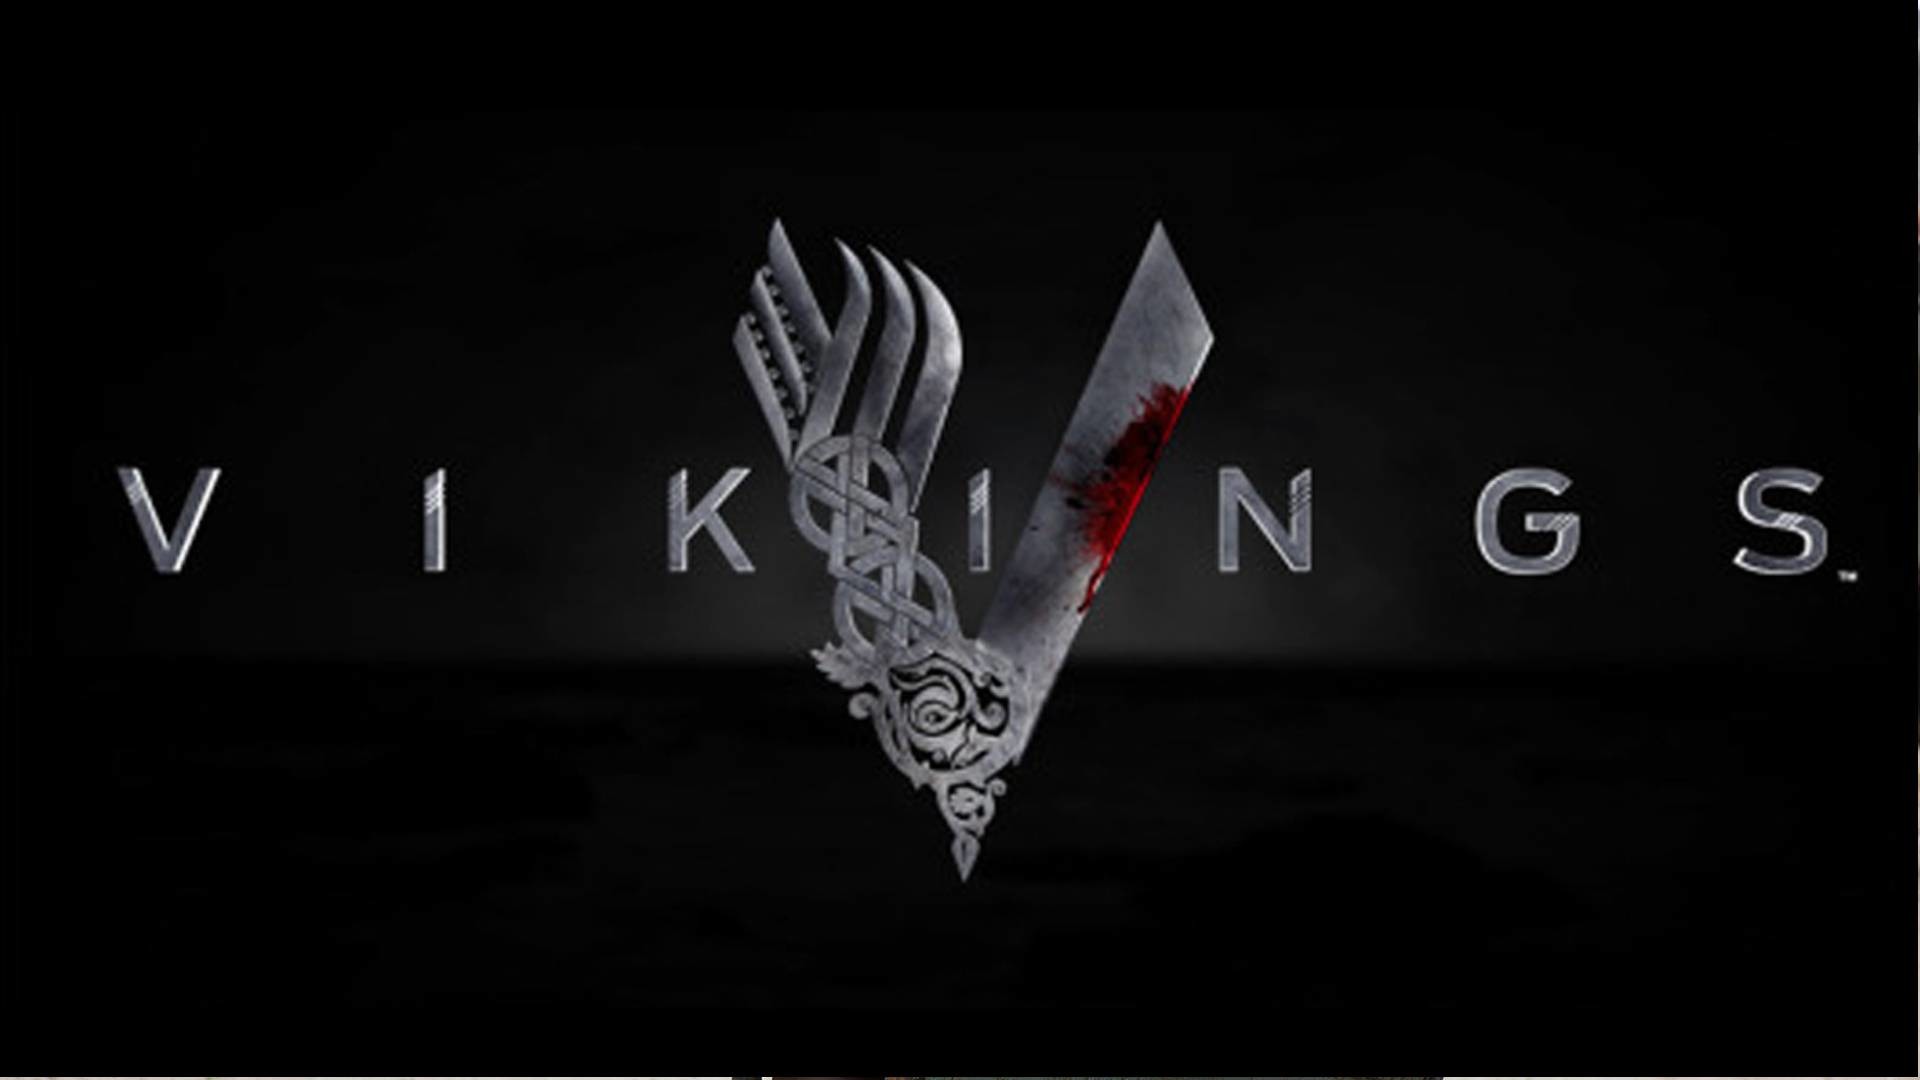 1920x1080 undefined Viking Wallpaper (39 Wallpapers) | Adorable Wallpapers |  Wallpapers | Pinterest | Vikings, Wallpaper and Hd wallpaper